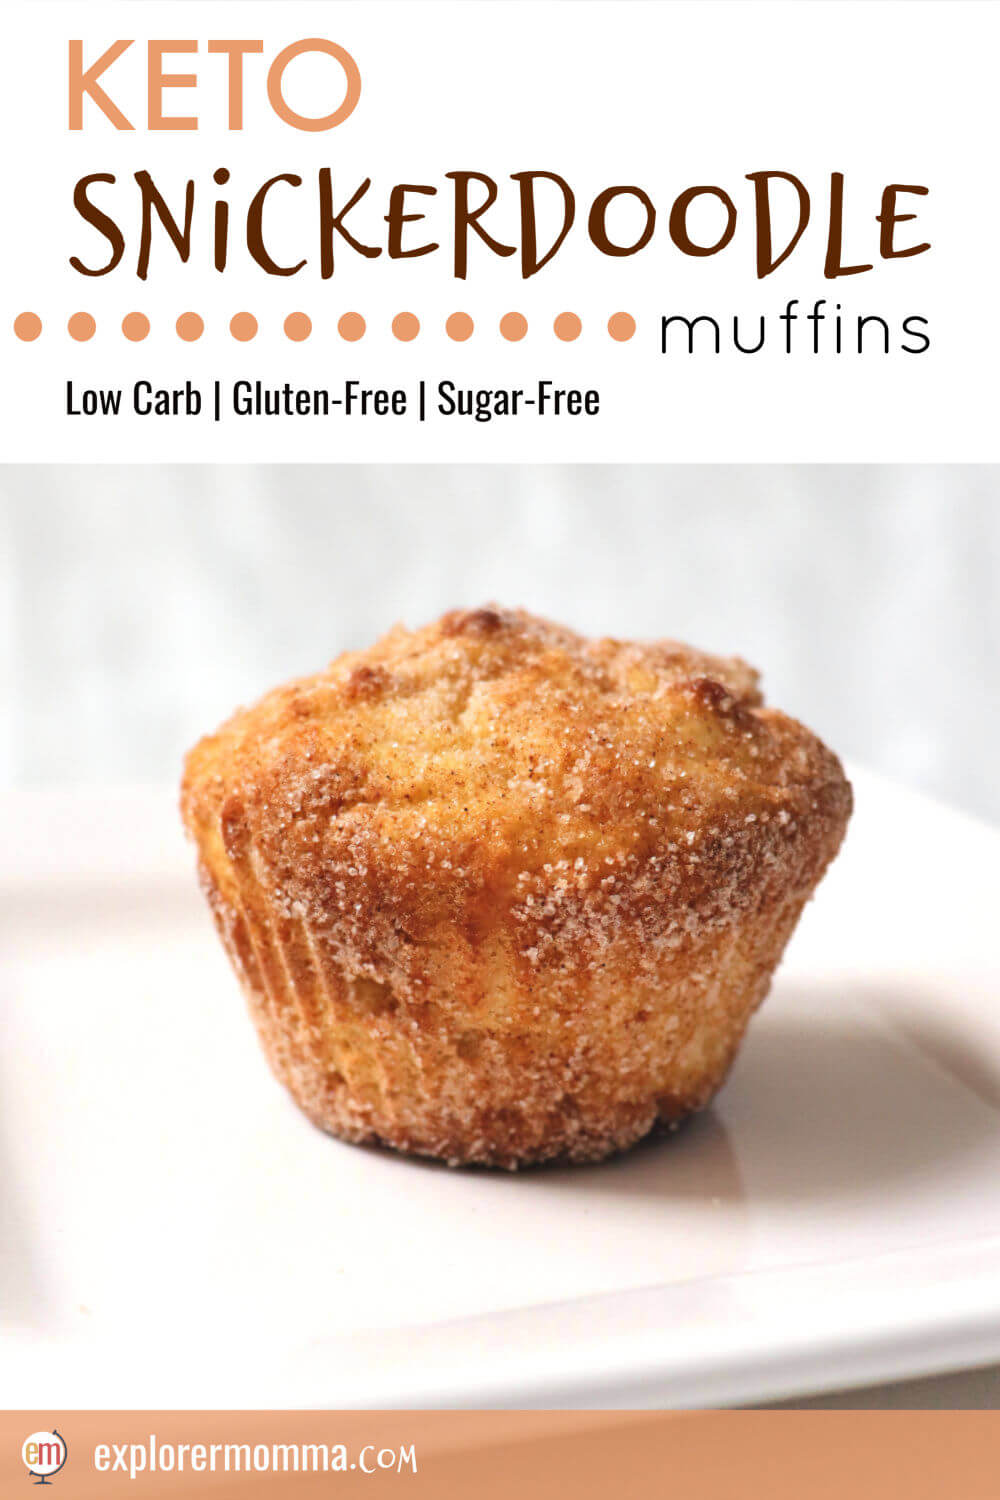 Cinnamon spice in a low carb breakfast. What gluten-free treat could be better? Keto snickerdoodle muffins are soft and delicious and perfect for a low carb diet. #ketomuffins #lowcarbrecipes